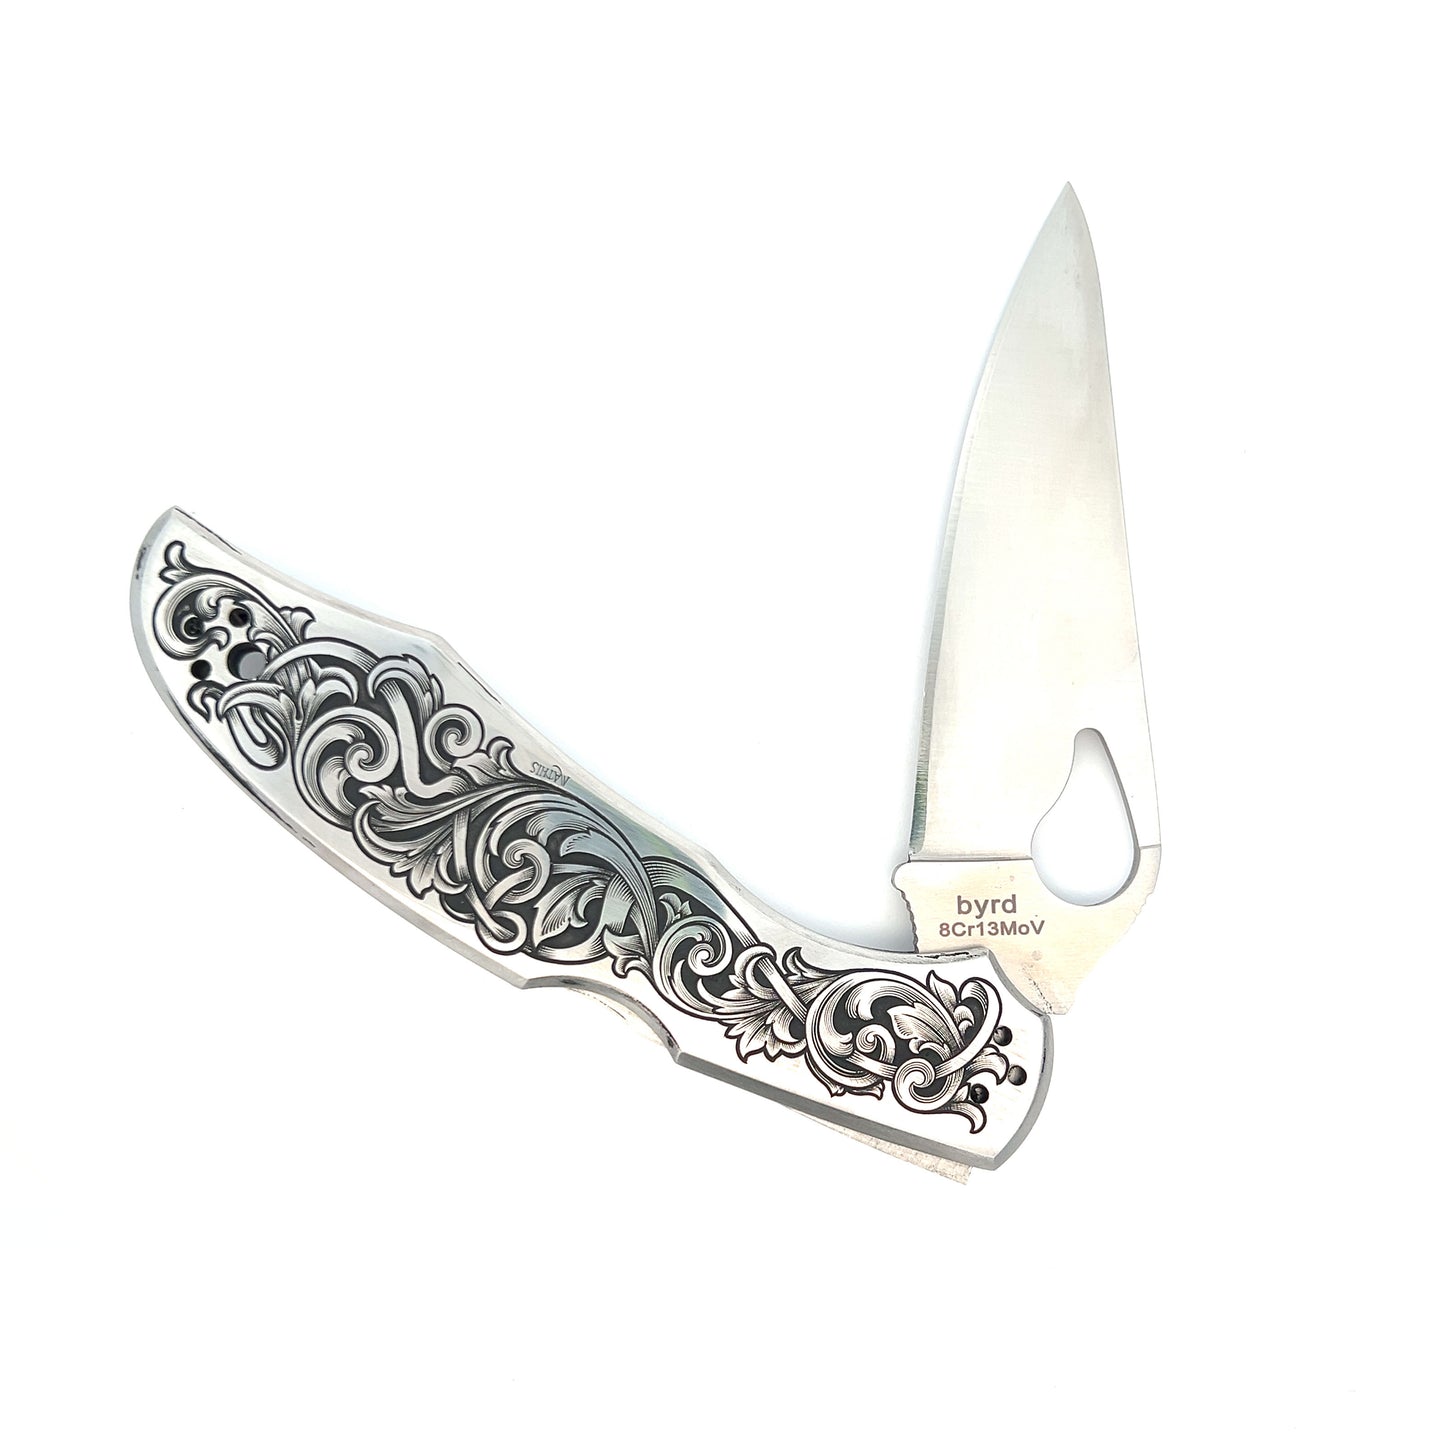 Hand-Engraved Stainless Steel Pocket Knife